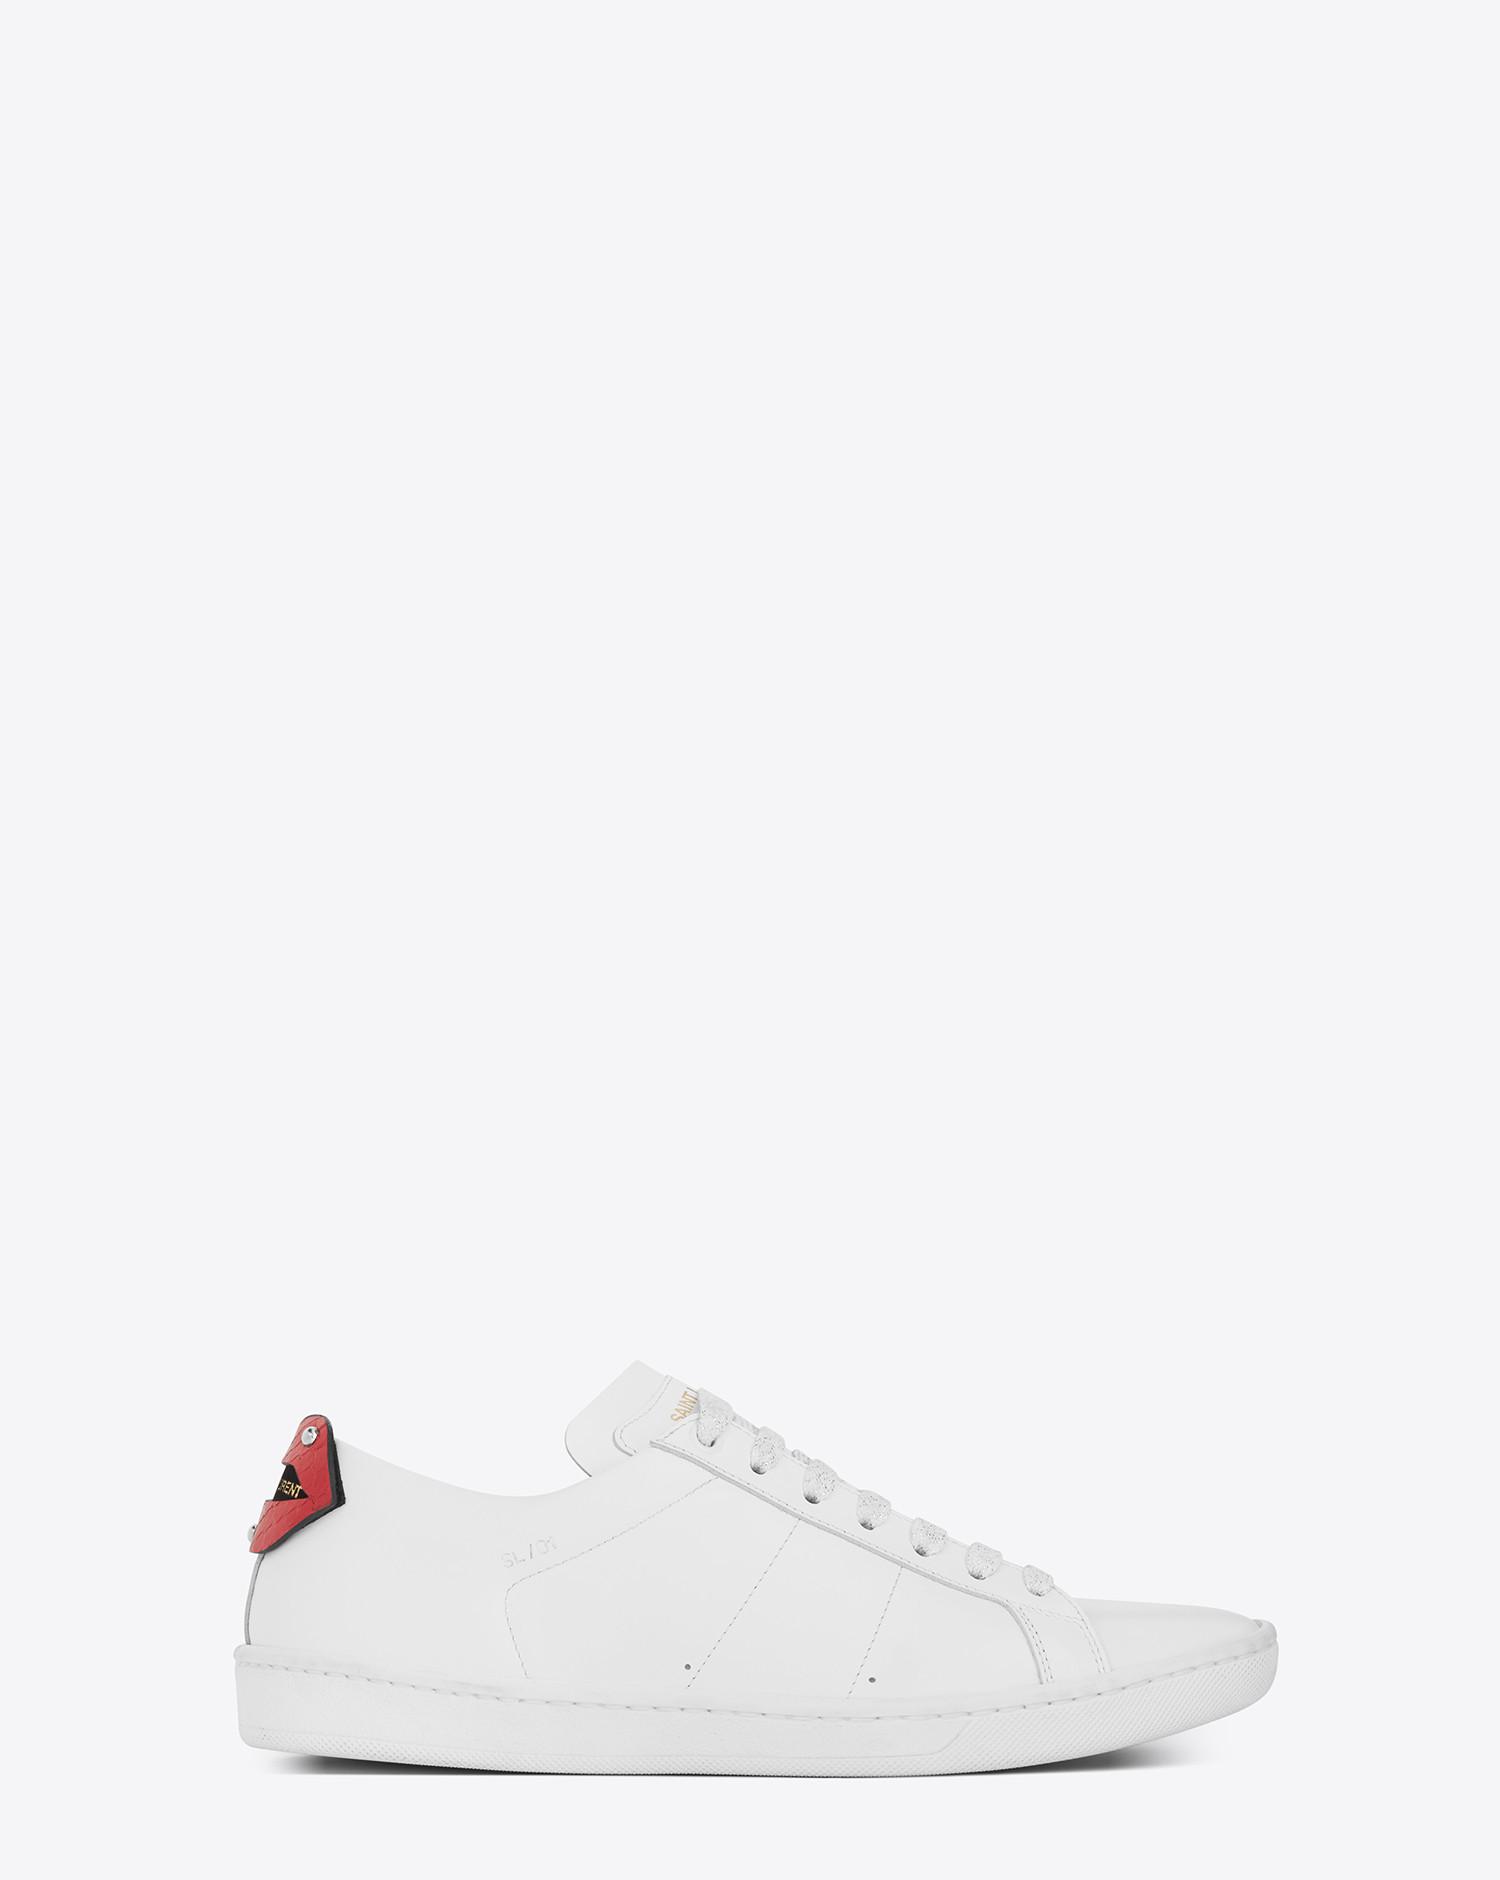 Saint Laurent Signature Court Classic Sl/06 Lips Sneaker In Optic White  Leather And Red And Blue Metallic Snakeskin | Lyst